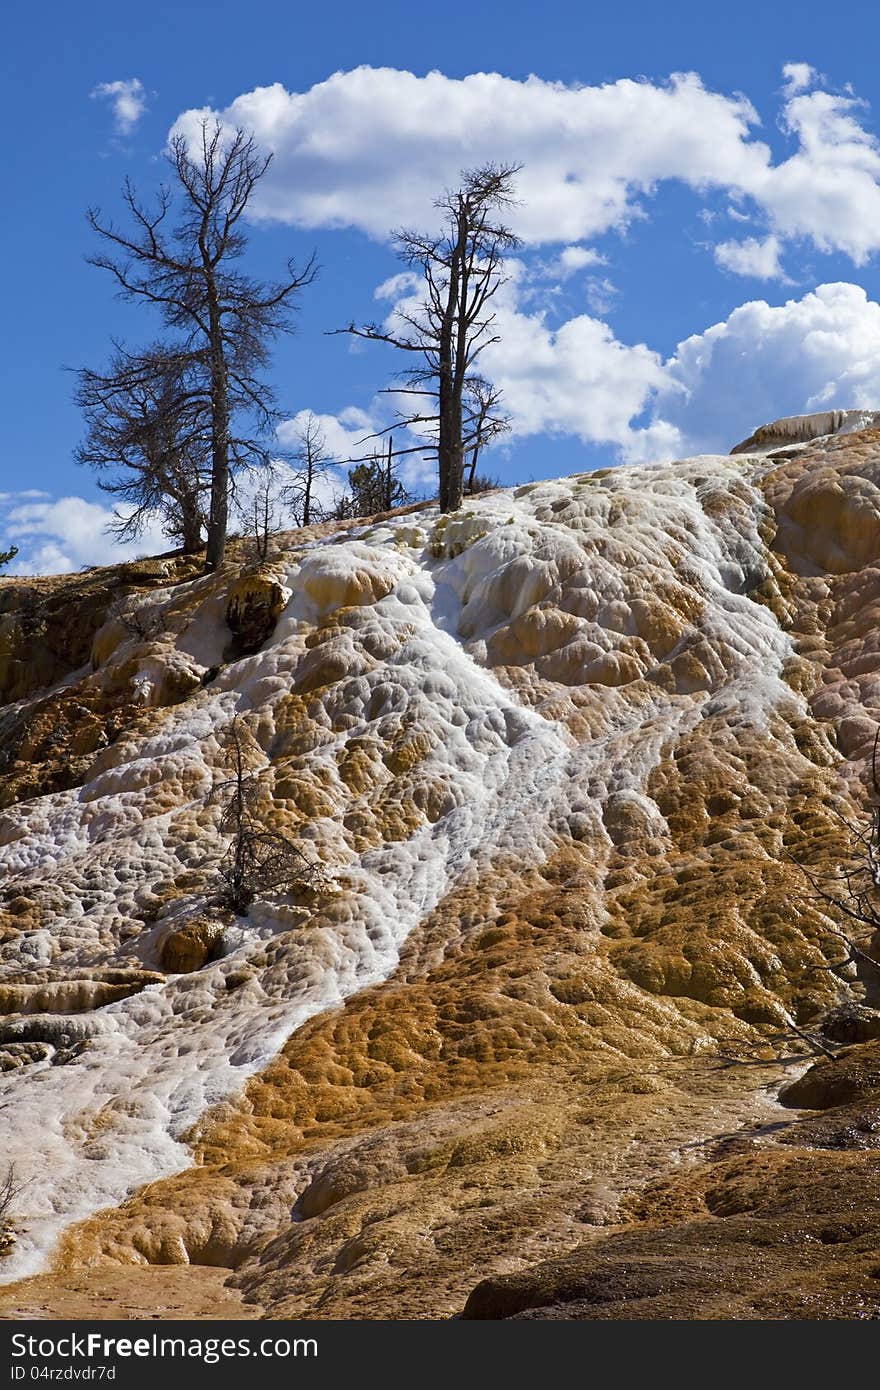 Hot sulphur mineral flow shows brilliant colors reflecting in the sunlight at Mammoth Yellowstone National Park Wyoming. Hot sulphur mineral flow shows brilliant colors reflecting in the sunlight at Mammoth Yellowstone National Park Wyoming.